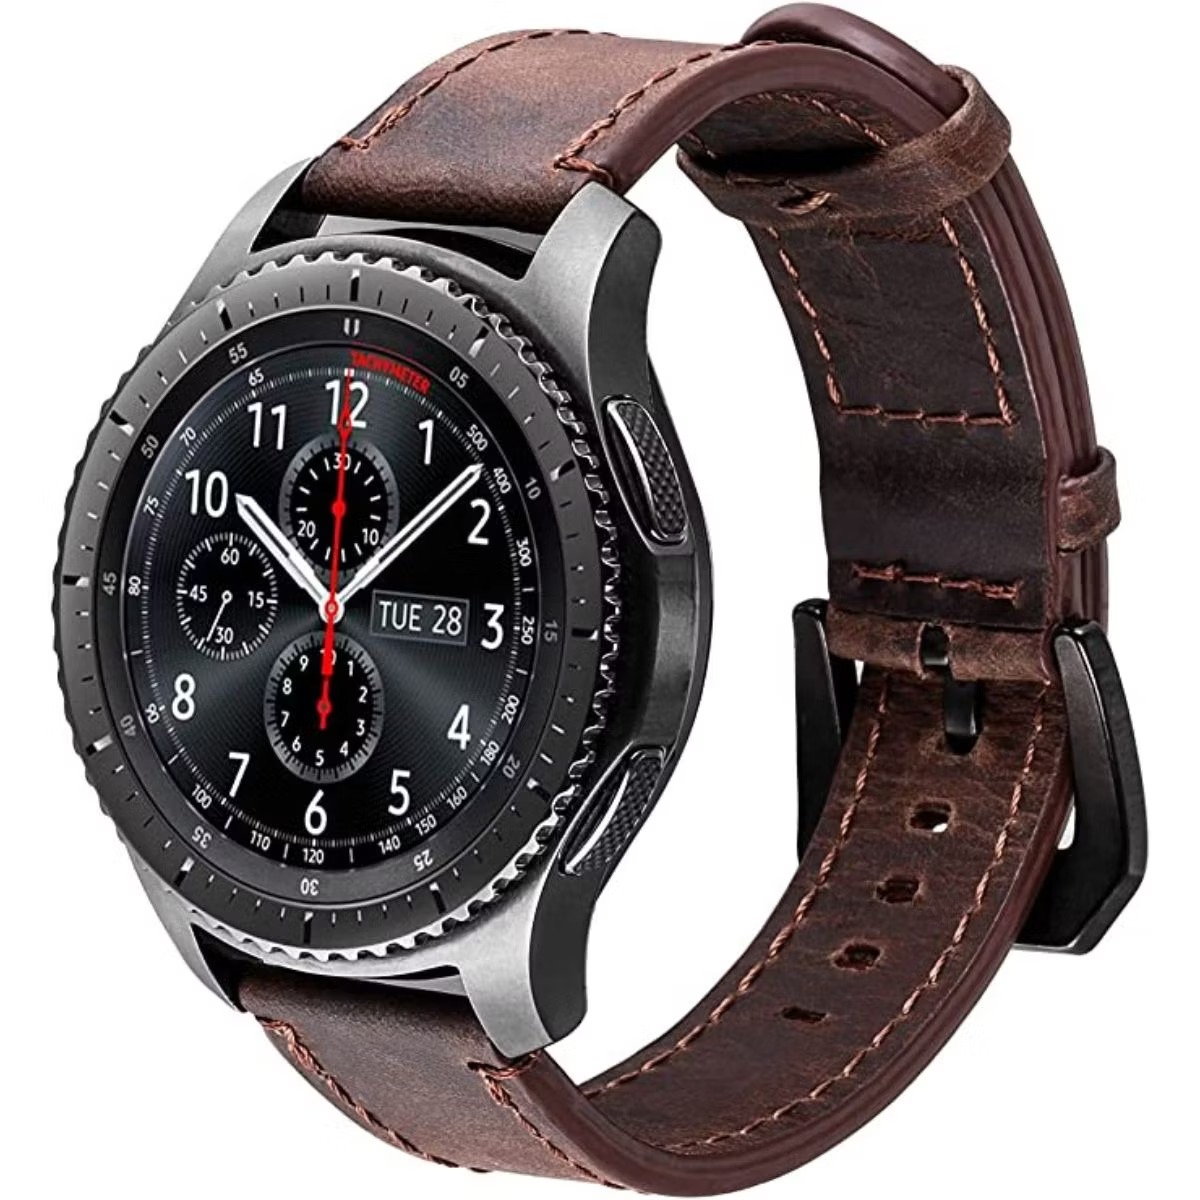 13 Best Samsung Gear S3 Band for 2023